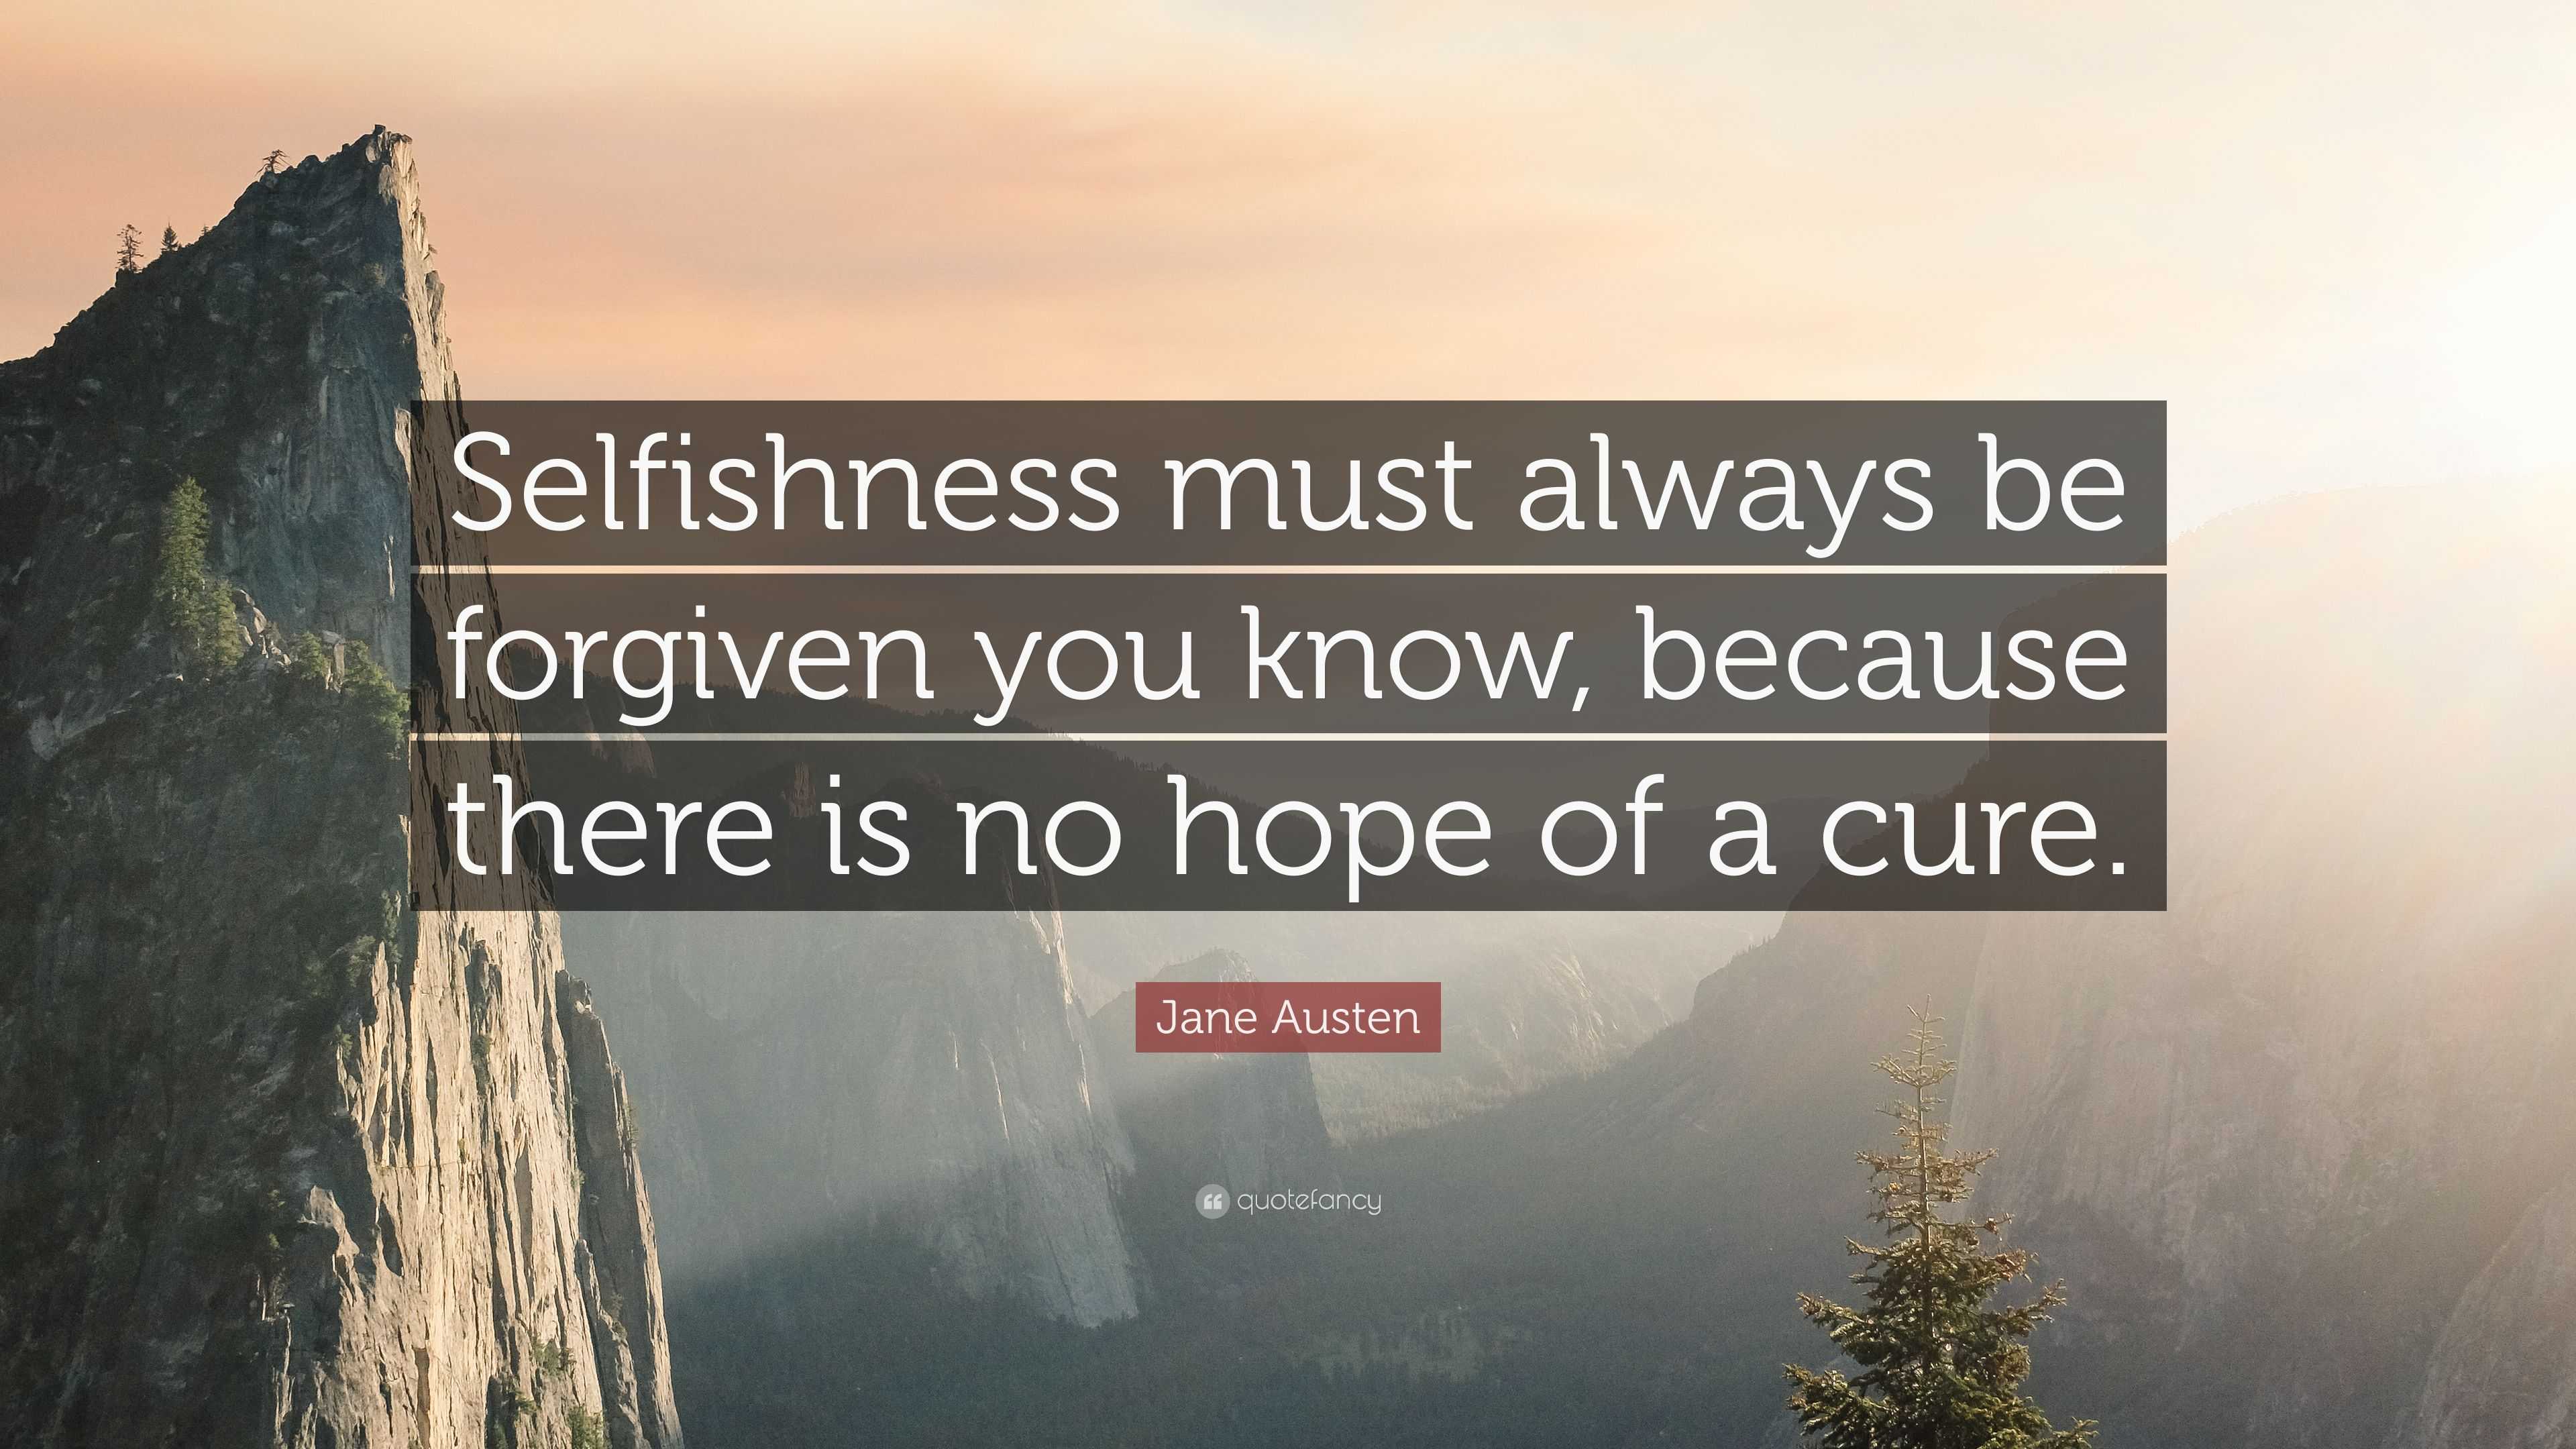 Jane Austen Quote: “Selfishness must always be forgiven you know